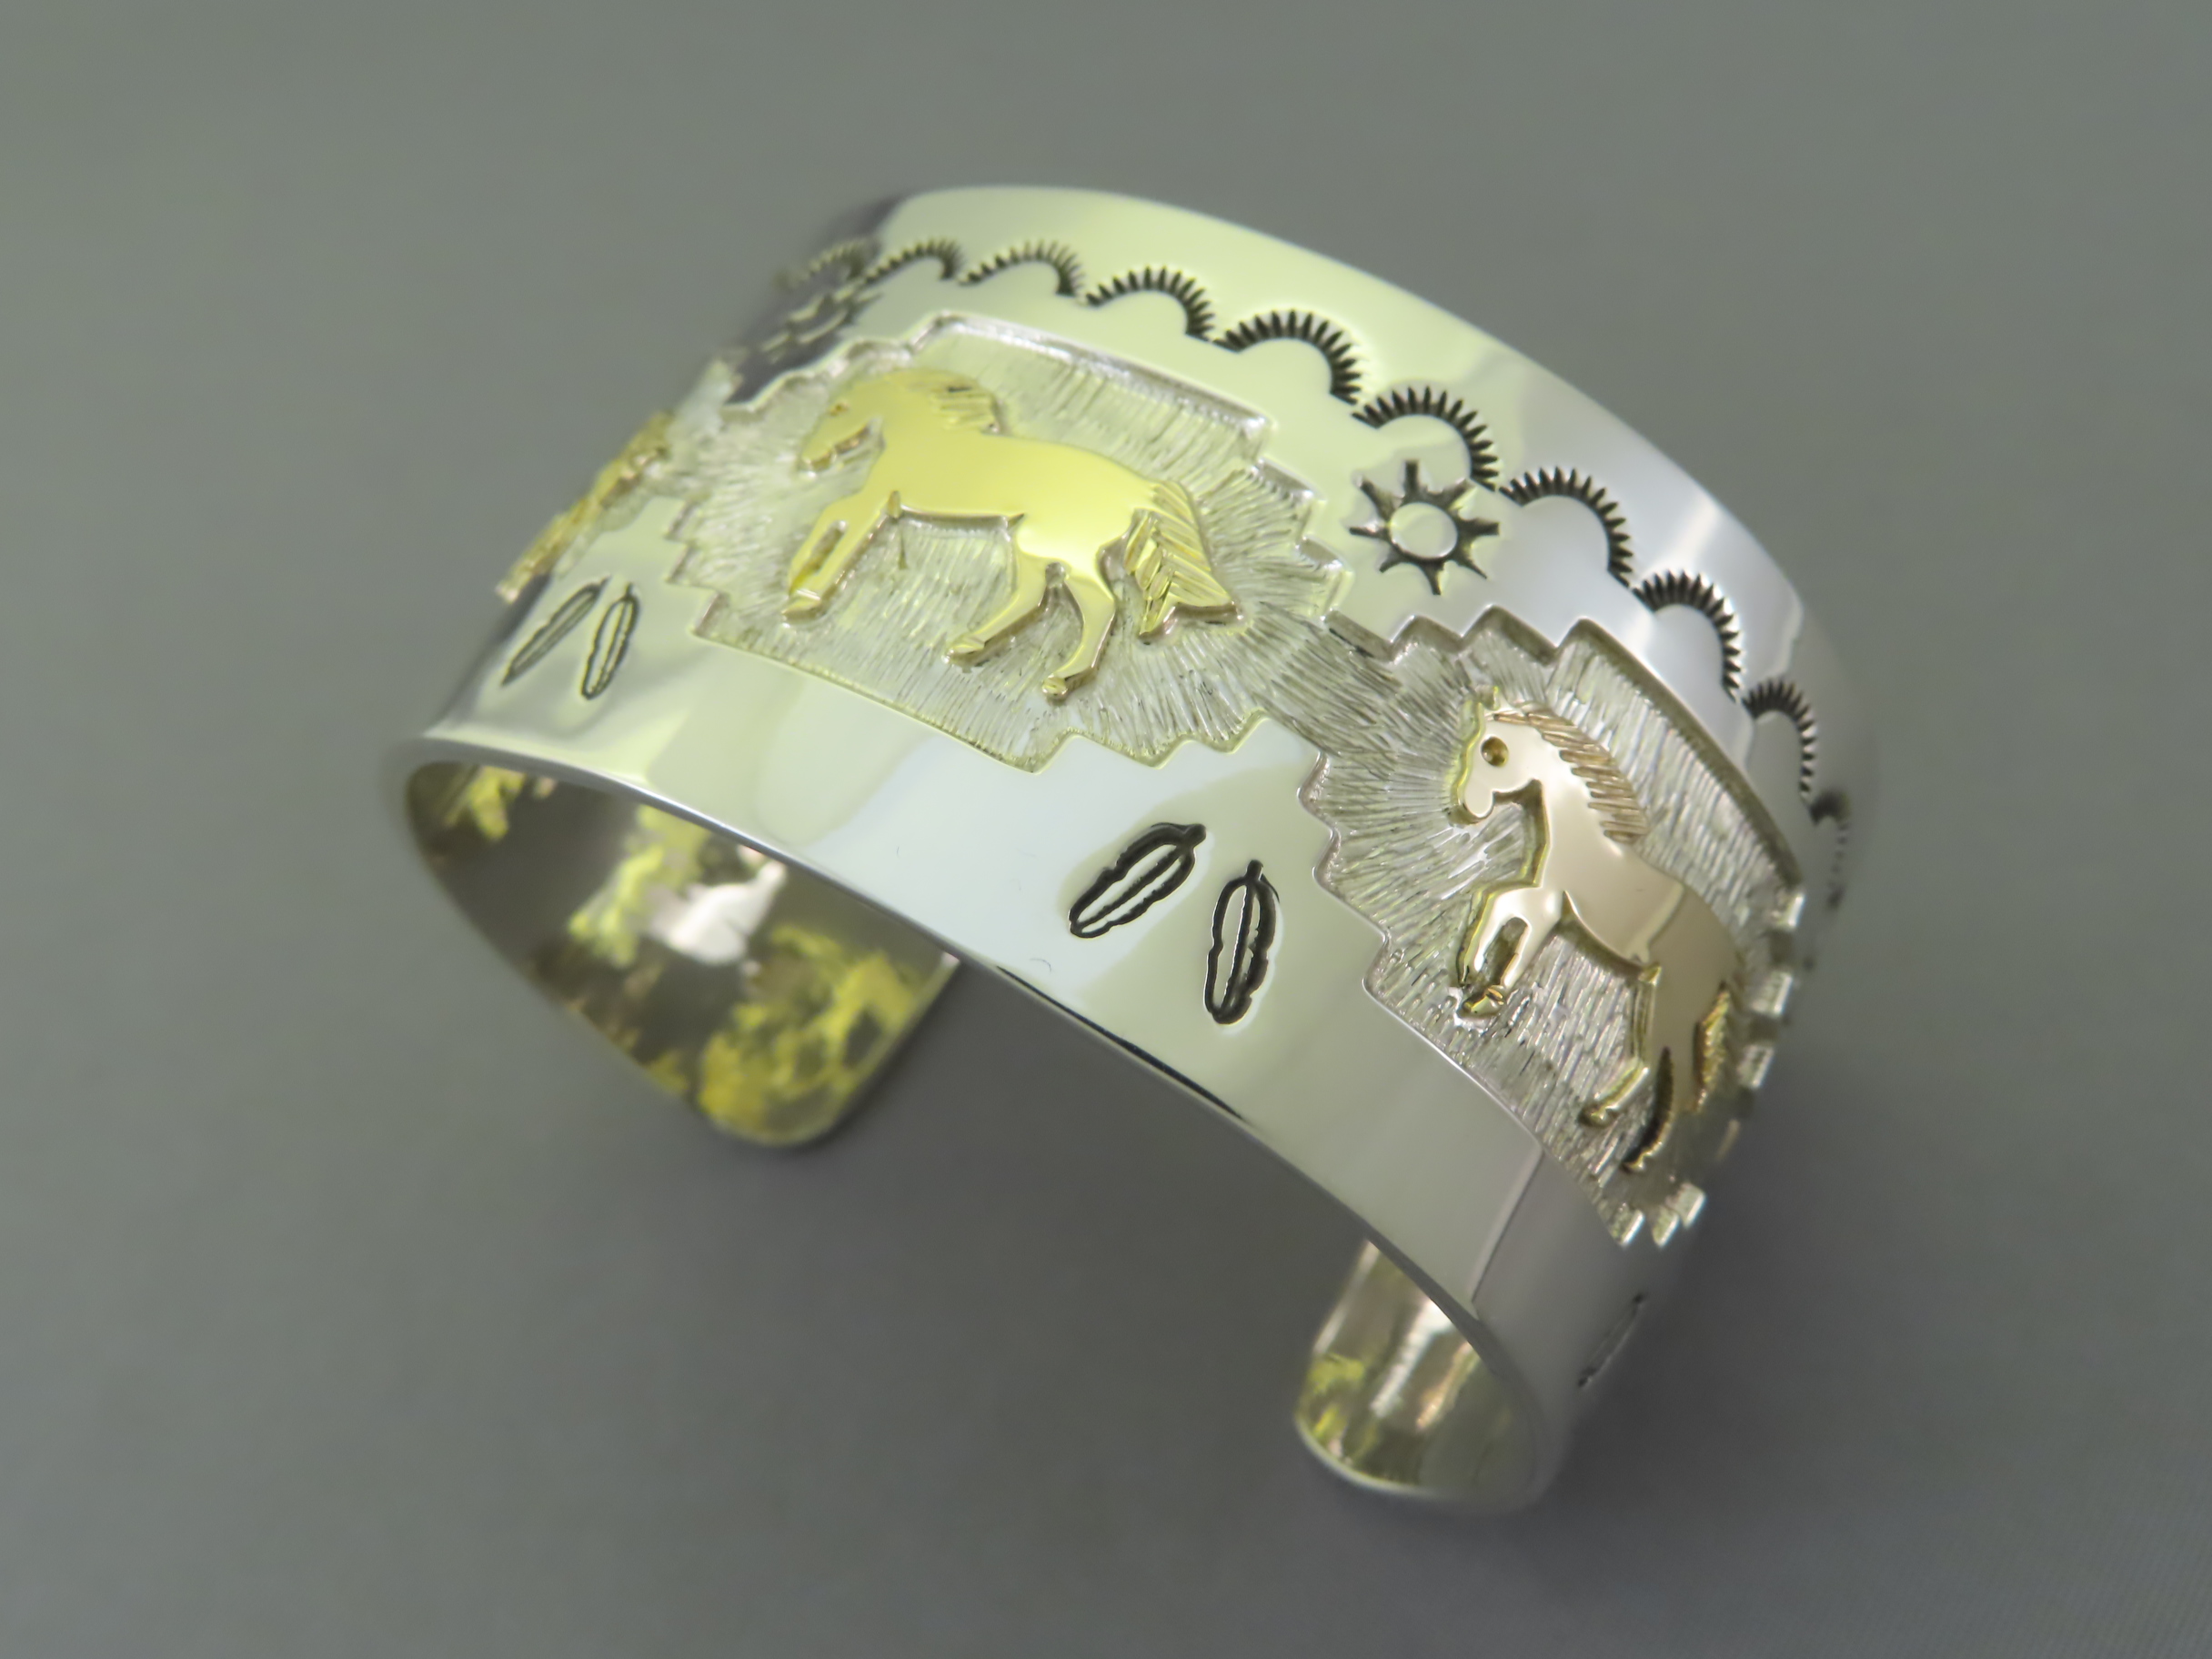 HORSE Bracelet by Fortune Huntinghorse - Cuff Bracelet with Horses